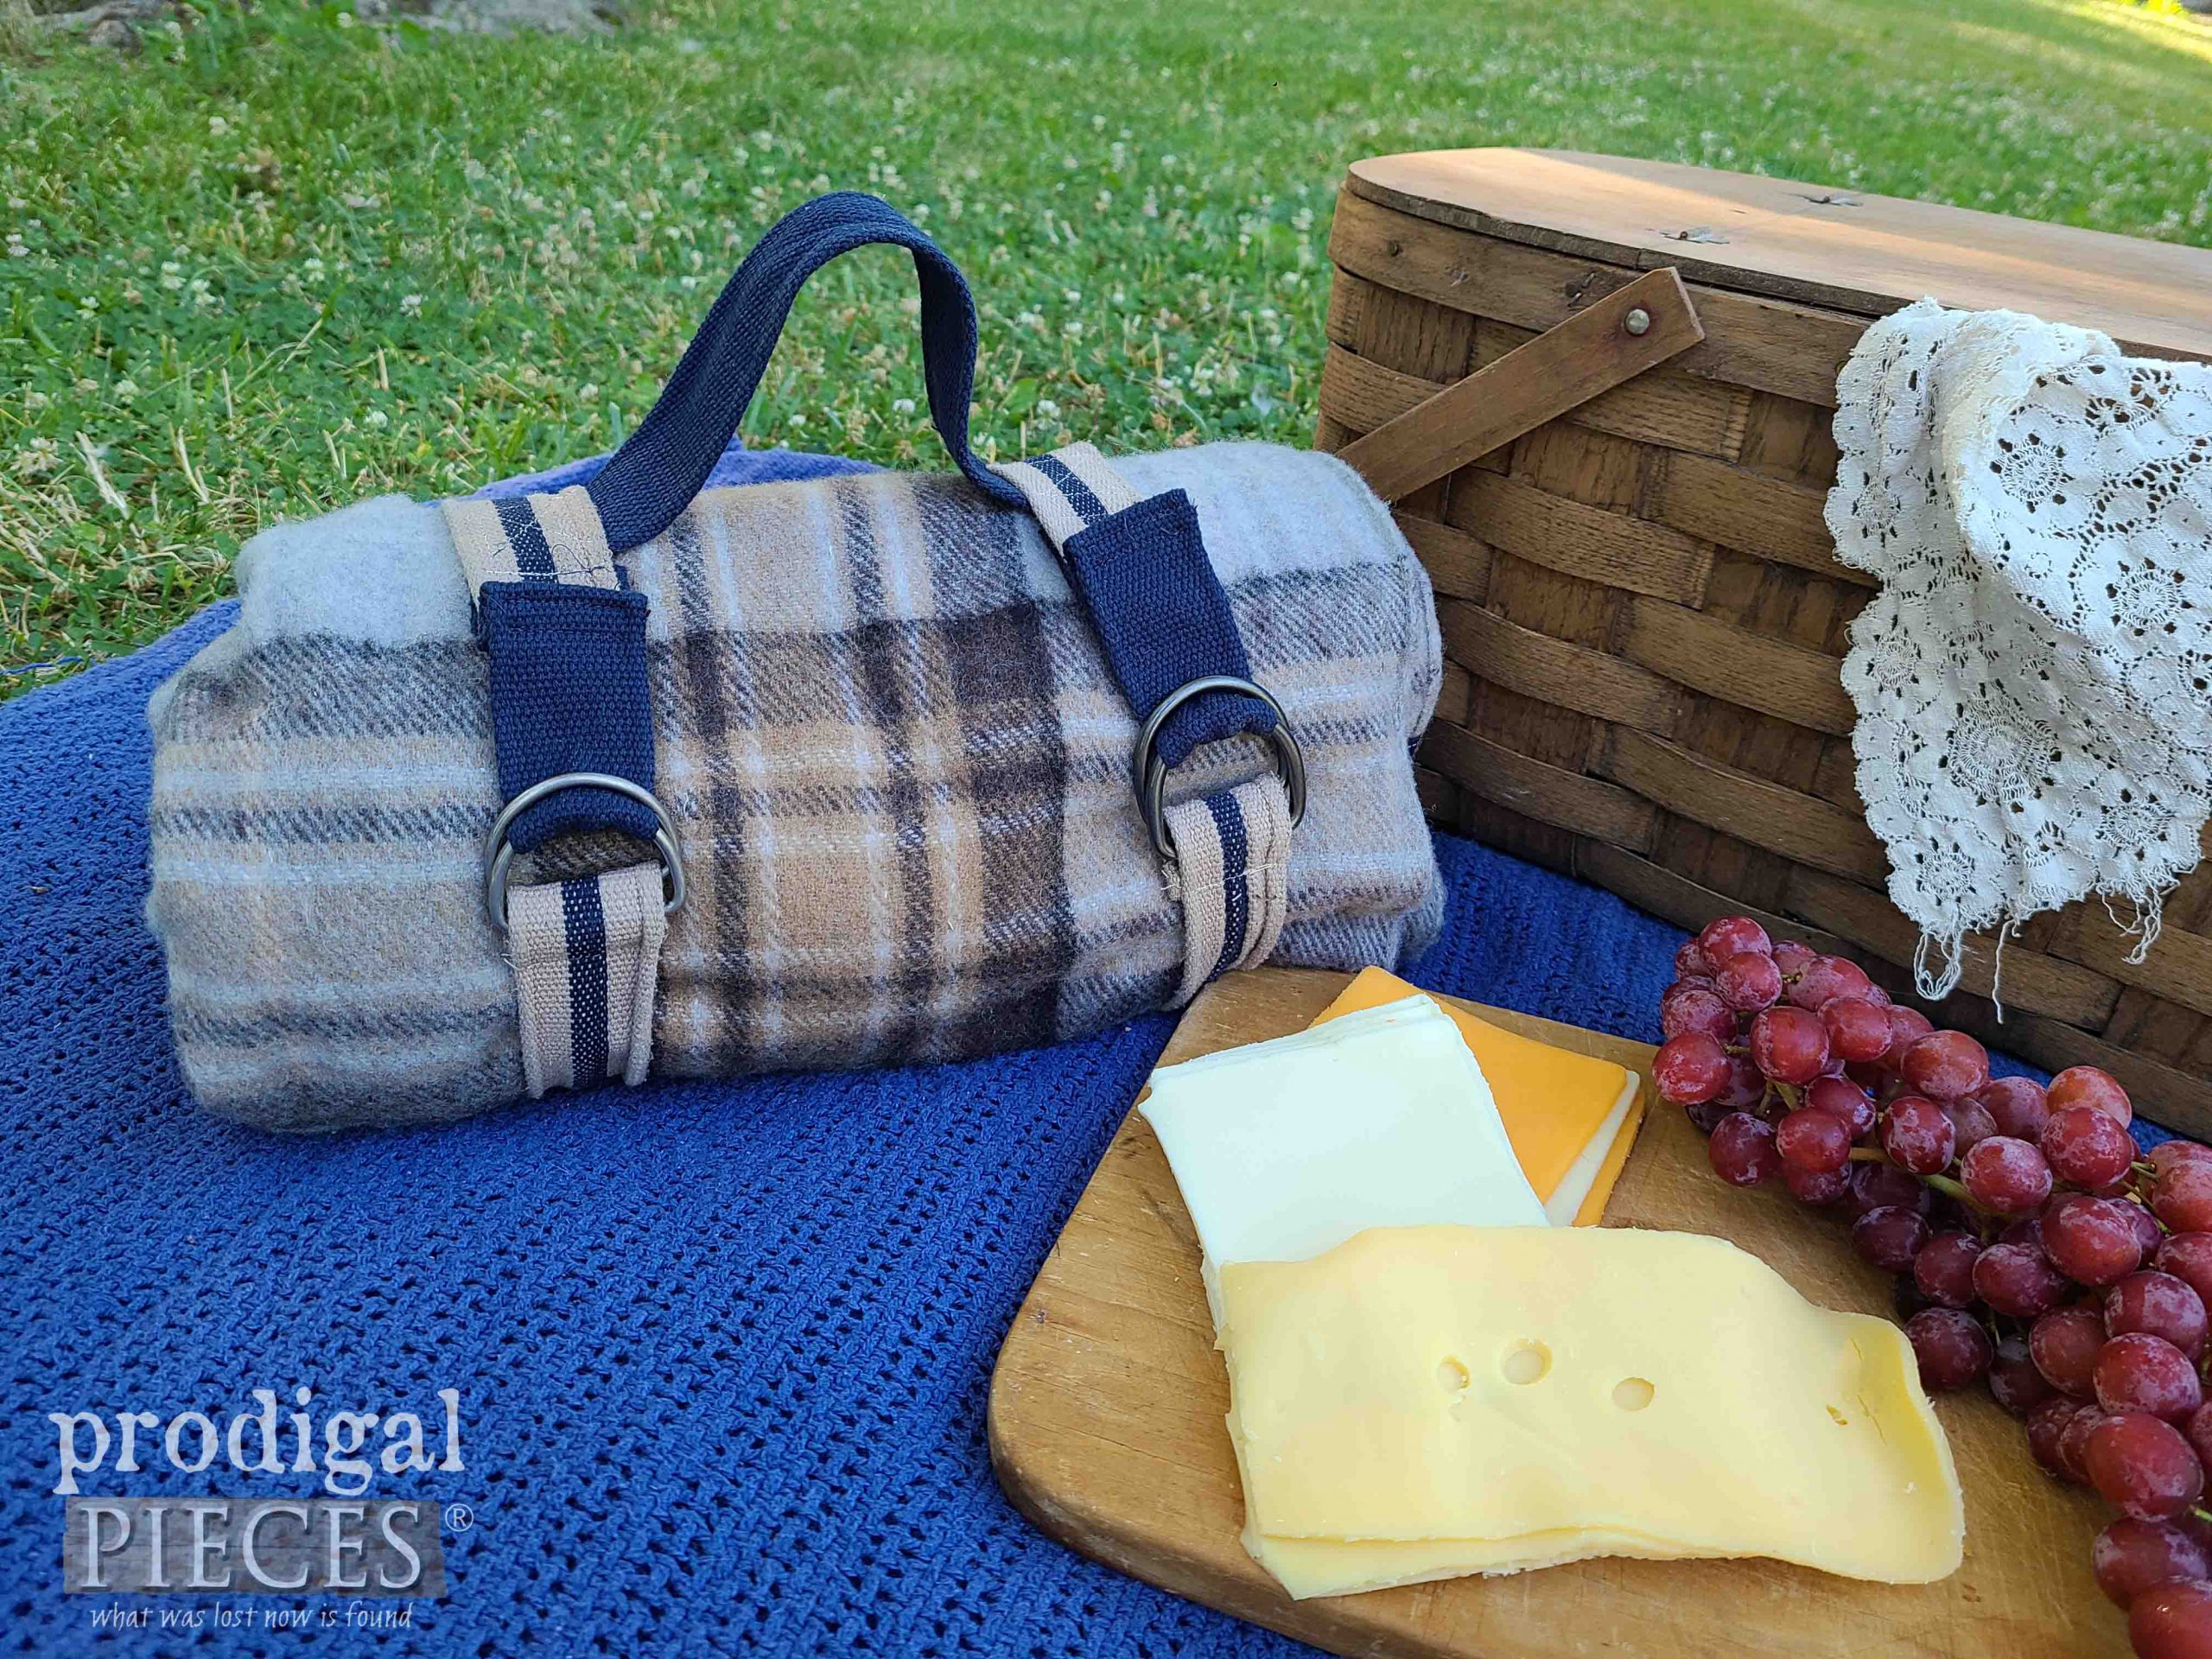 Upcycled DIY Blanket Carrier for Picnics or Beach with Tutorial by Larissa of Prodigal Pieces | prodigalpieces.com #prodigalpieces #picnic #diy #refashion #summer #wedding